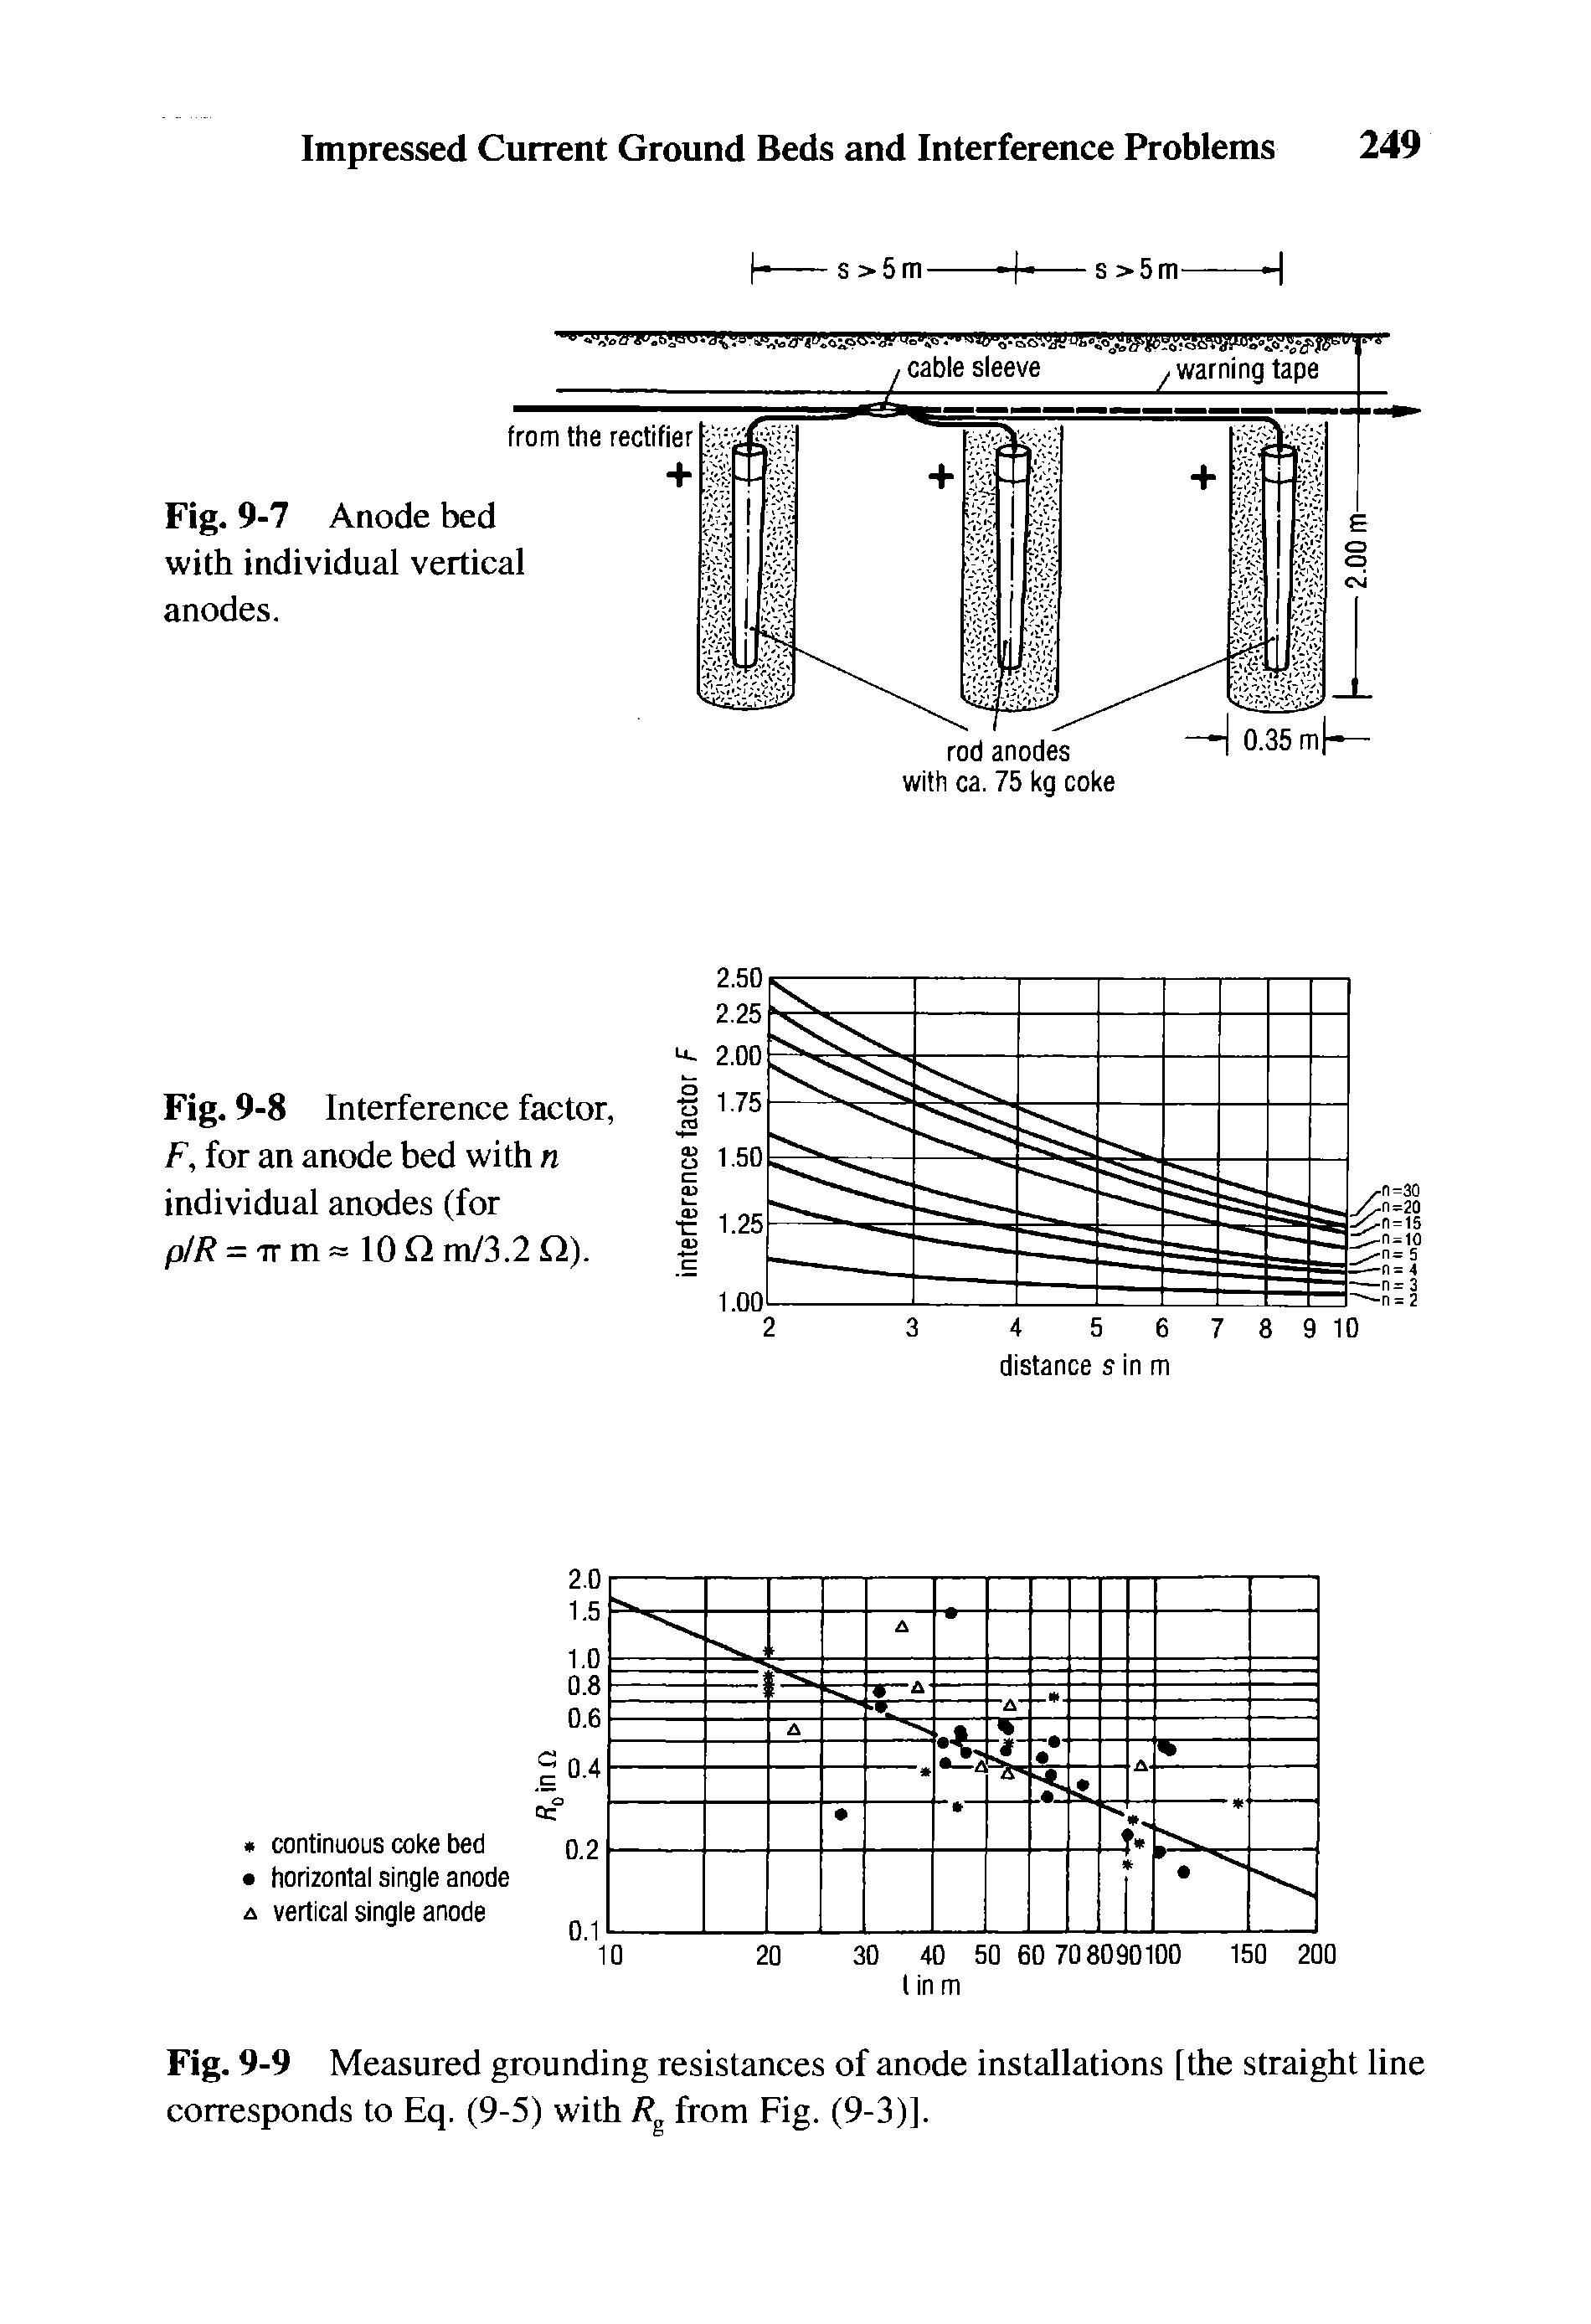 Fig. 9-9 Measured grounding resistances of anode installations [the straight line corresponds to Eq. (9-5) with from Fig. (9-3)].